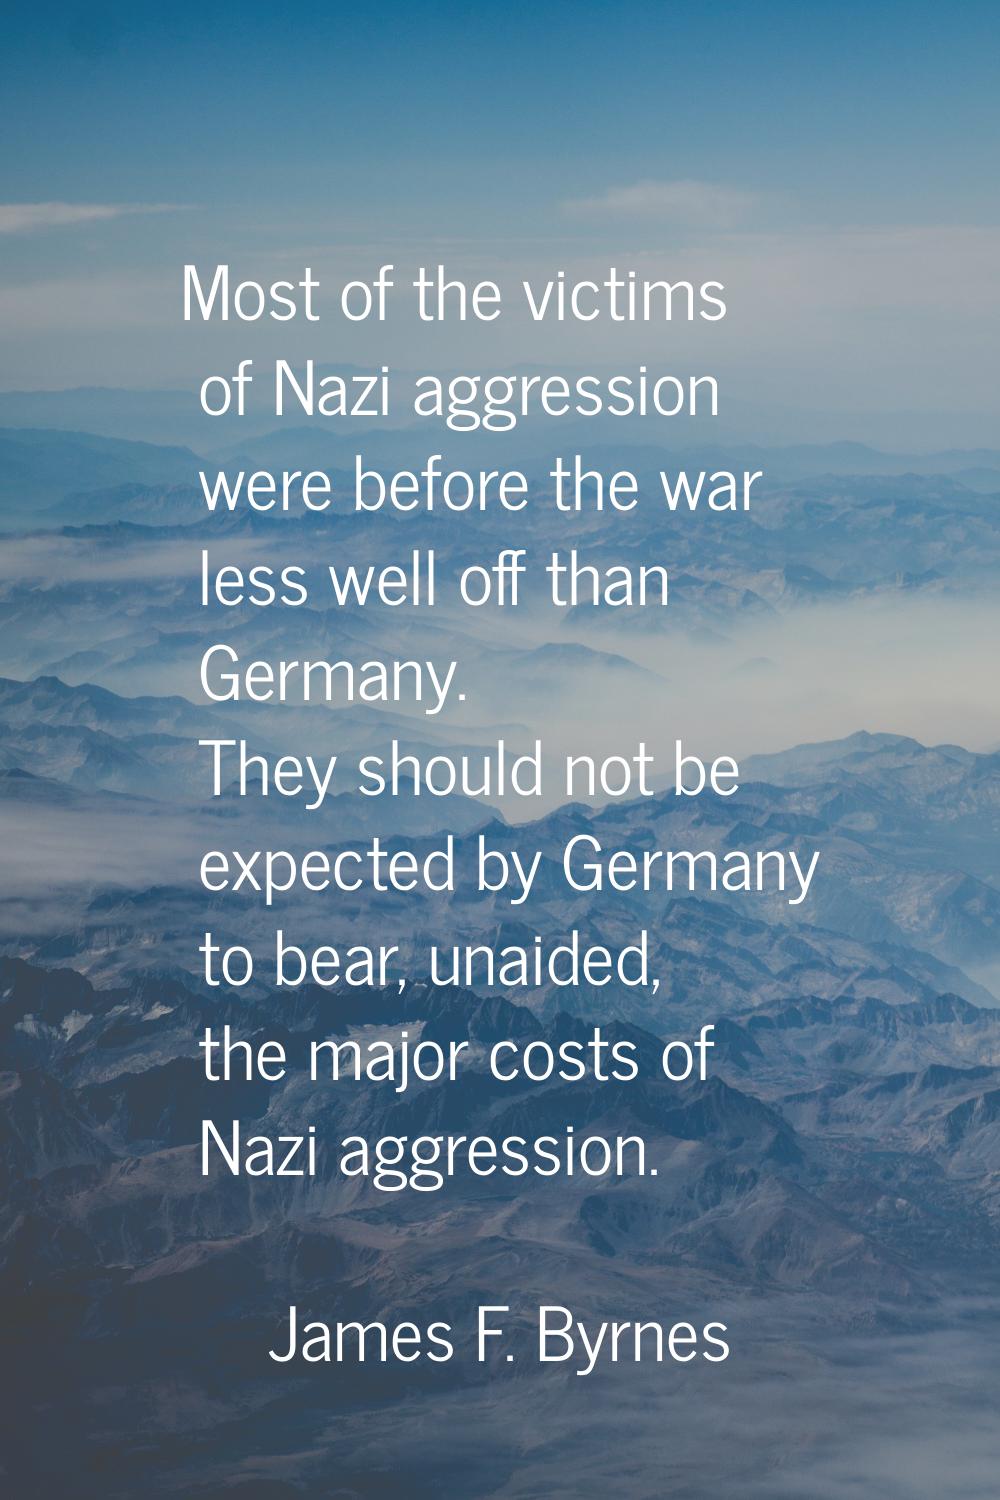 Most of the victims of Nazi aggression were before the war less well off than Germany. They should 